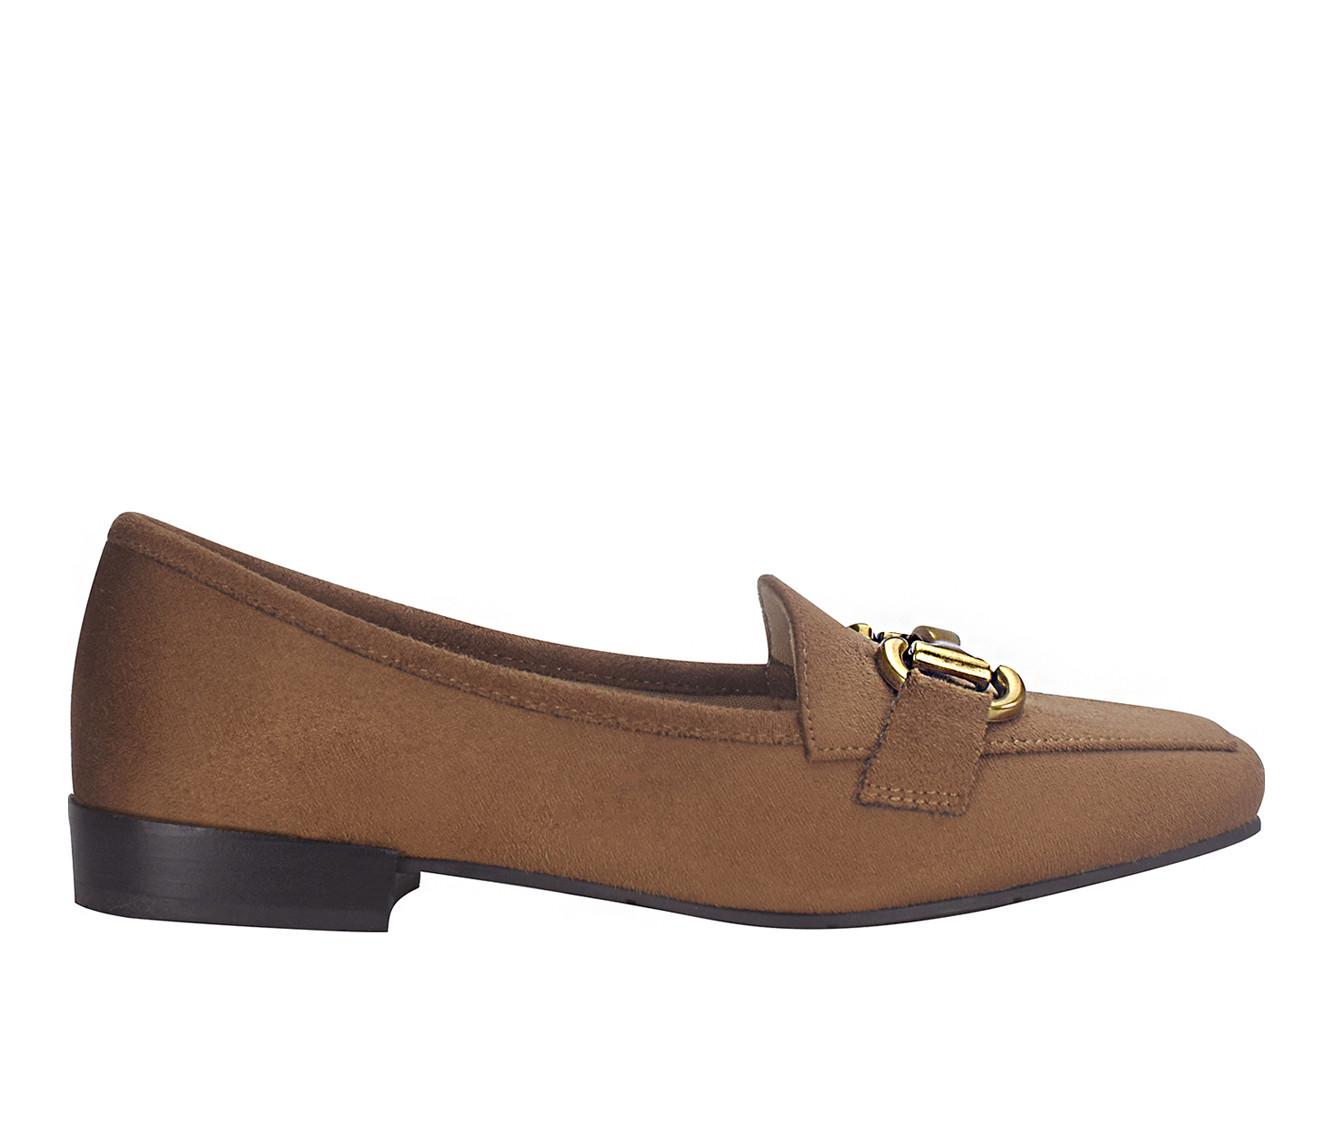 Women's Impo Baani Loafer